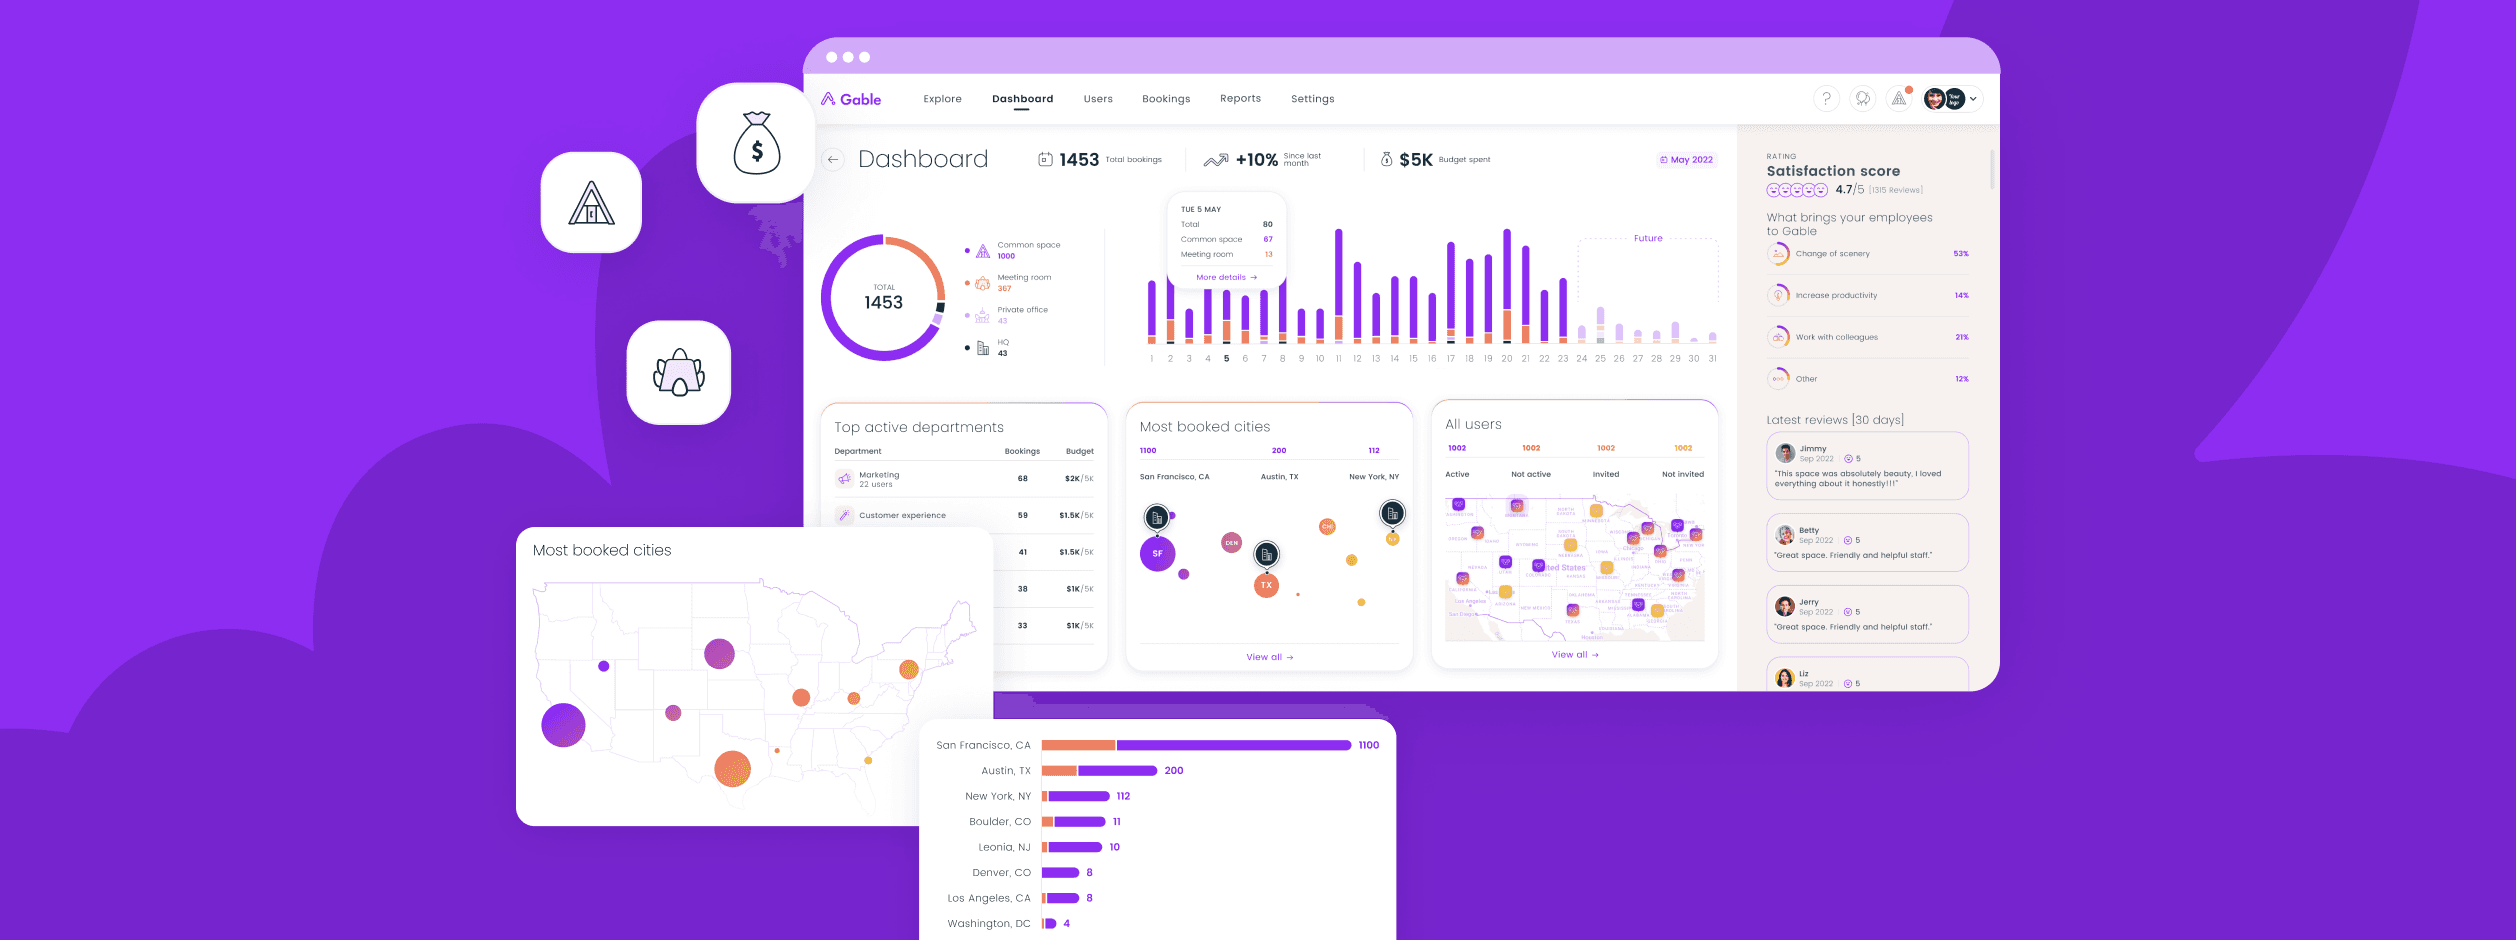 HR Dashboards: Examples, key metrics, and best practices